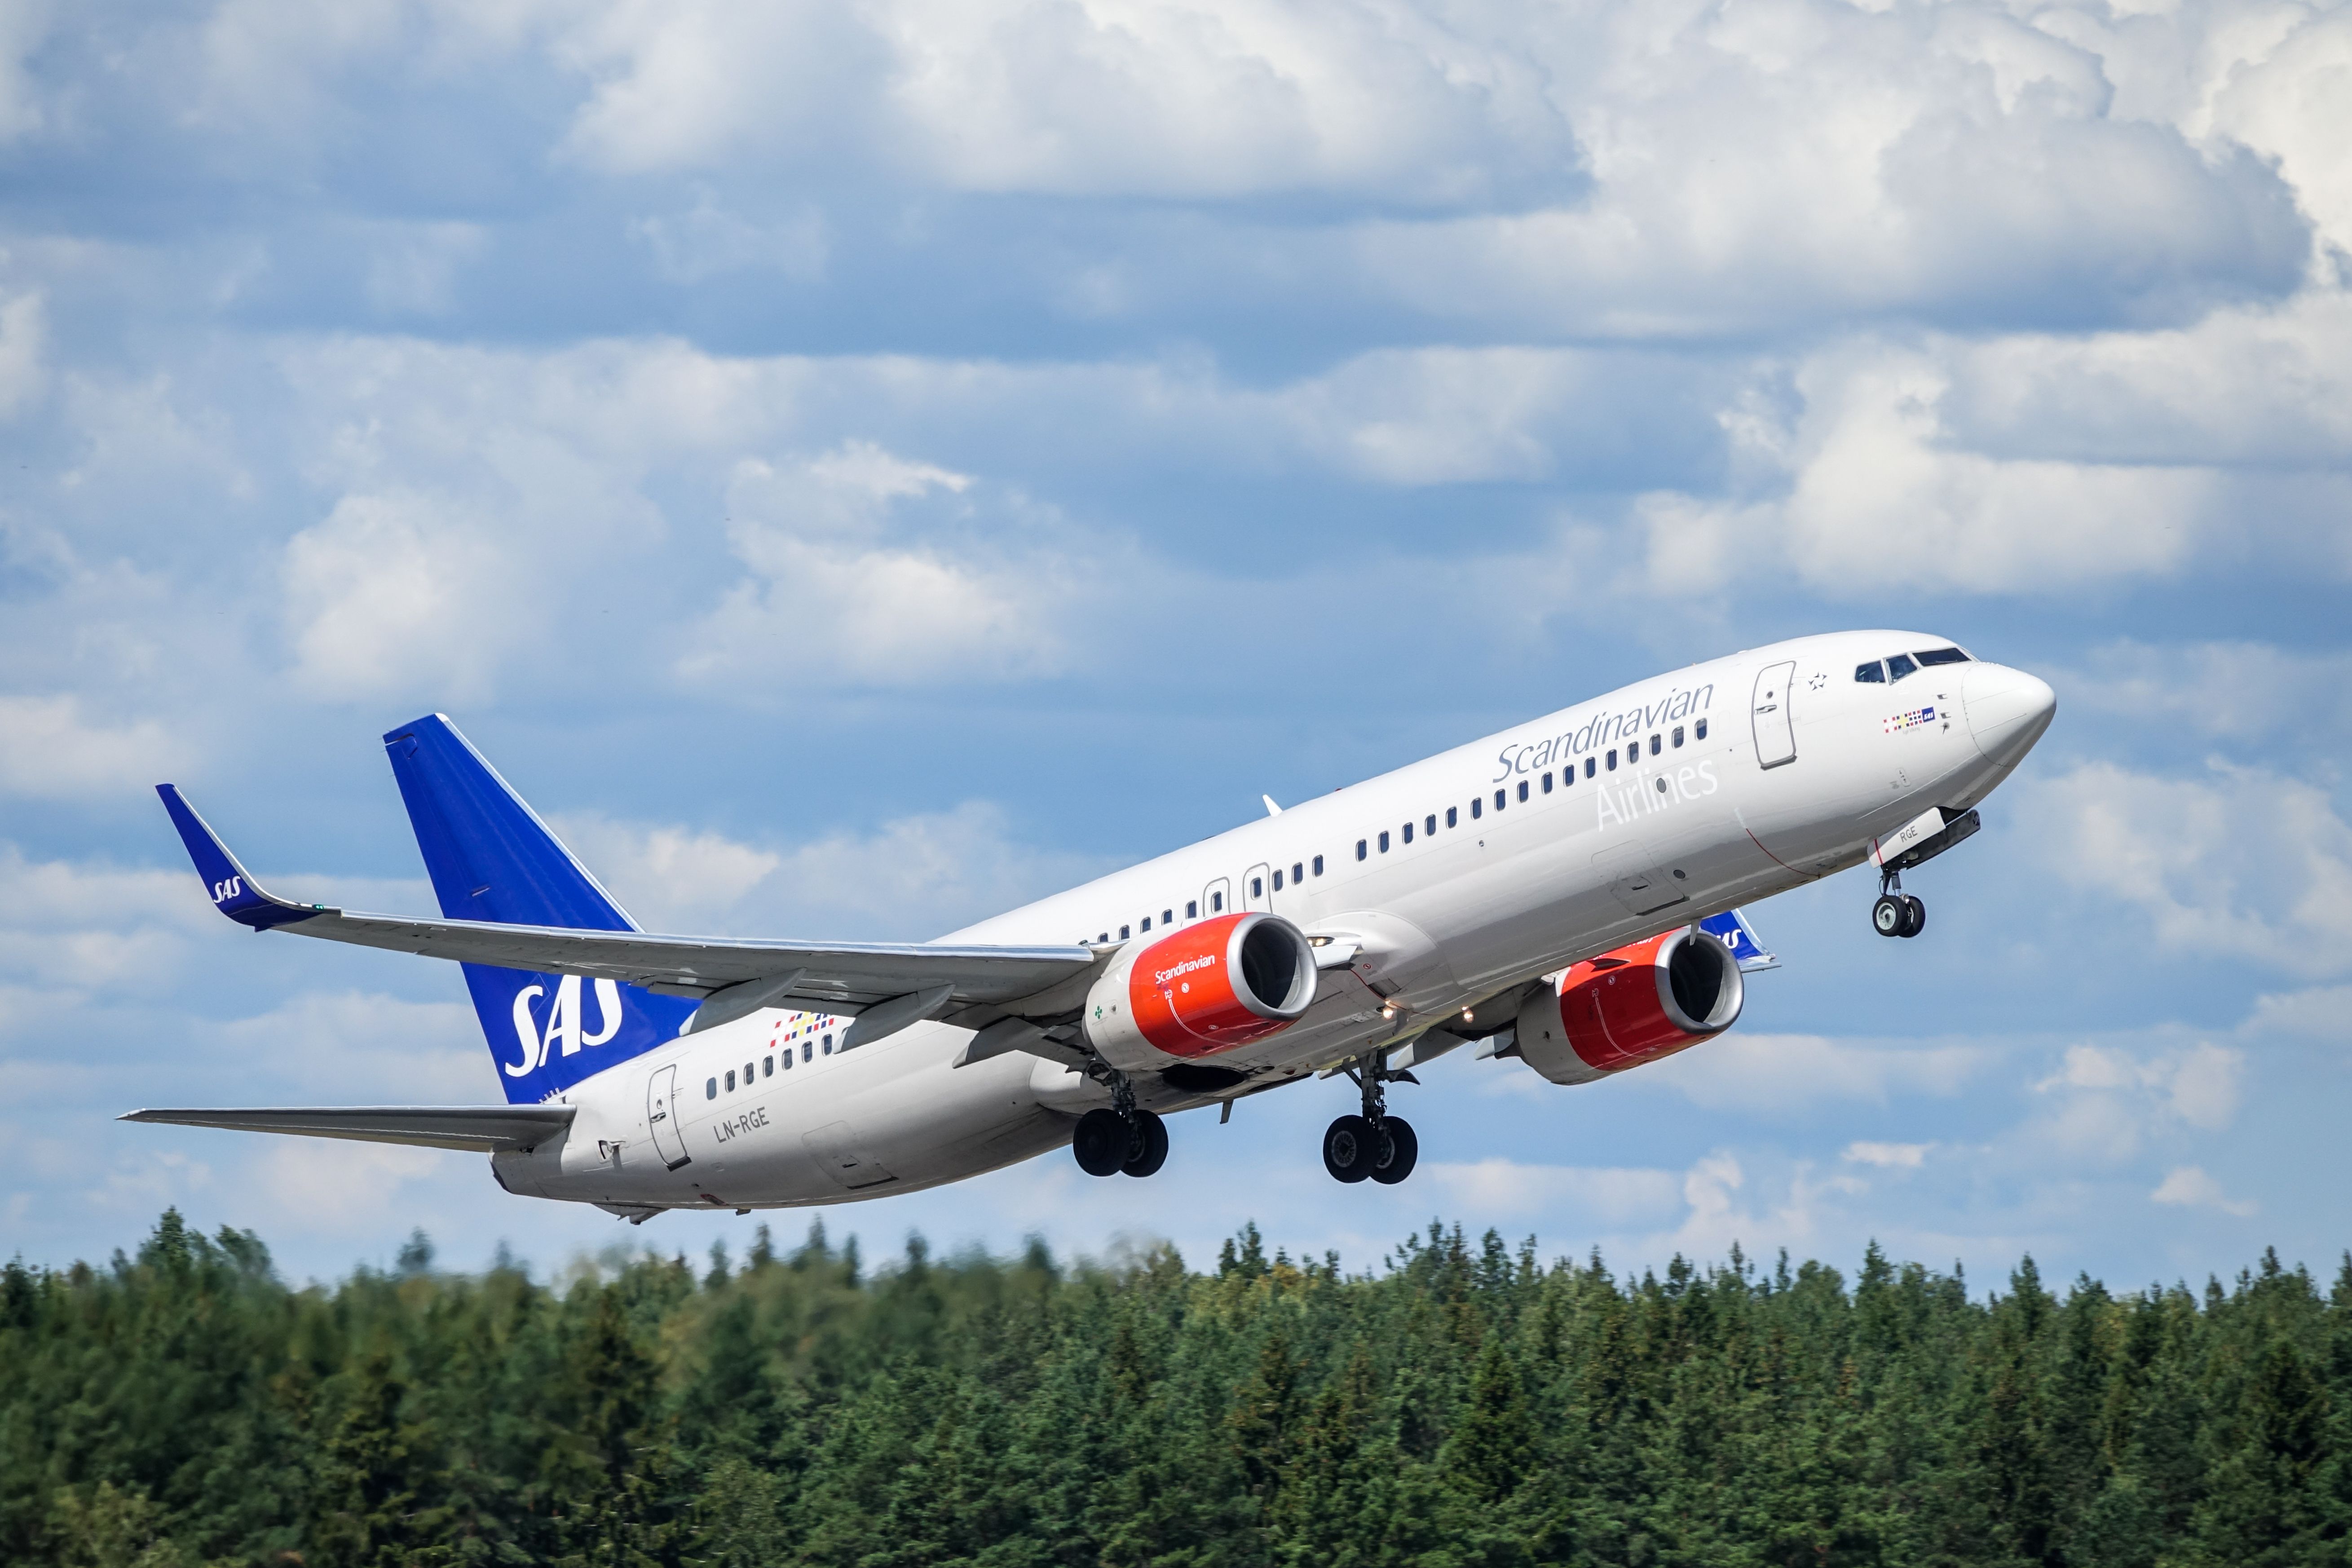  SAS Scandinavian Airlines, Boeing 737 - 800 taking off over the trees at Stockholm Arlanda Airport